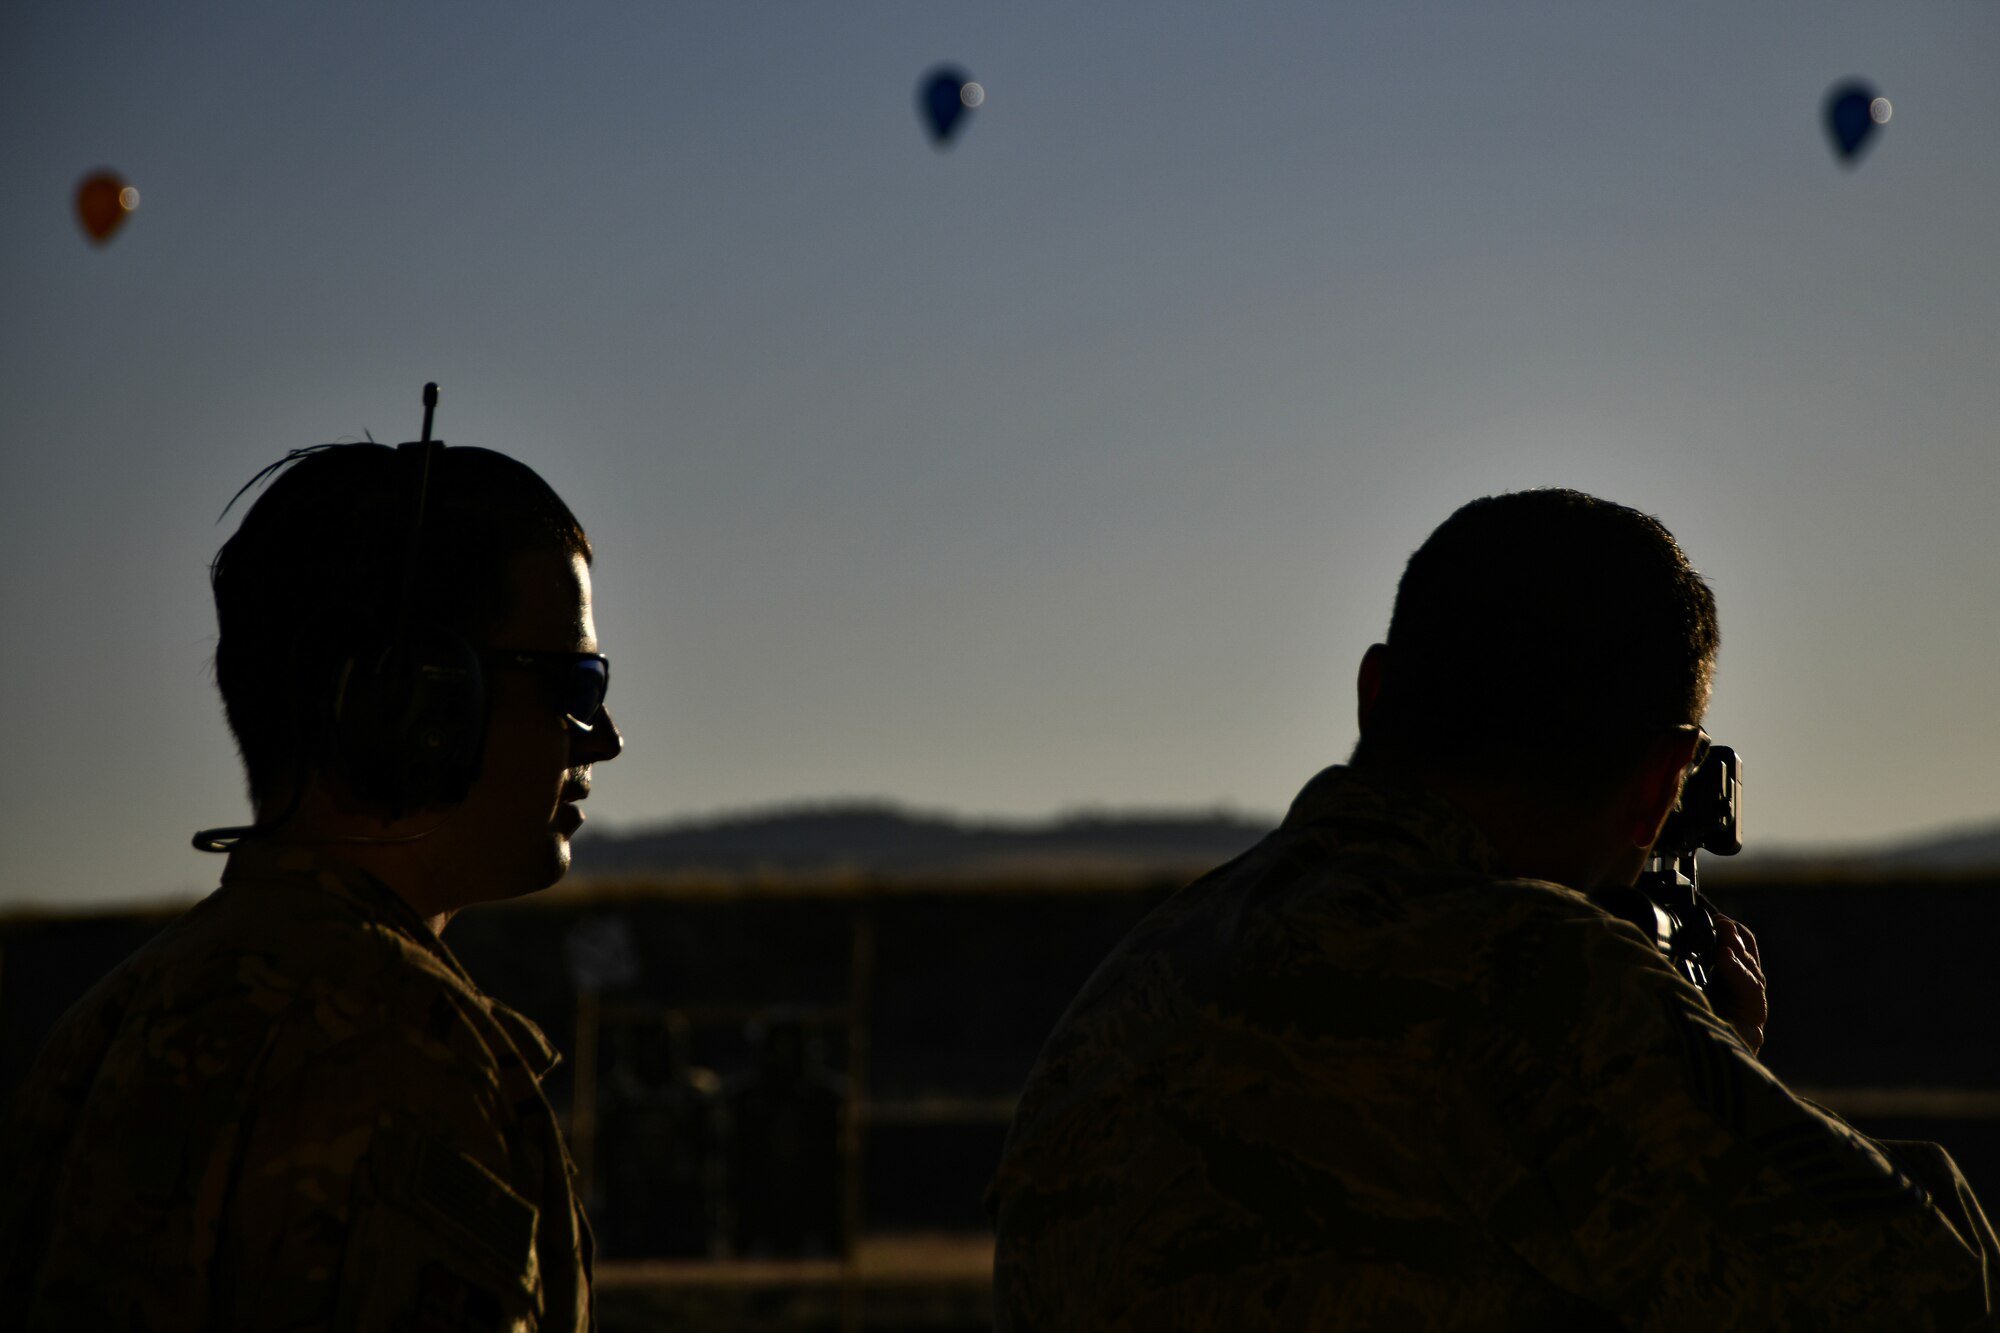 Chief Master Sgt. Dustin Hall, 9th Reconnaissance Wing command chief, receives instruction on how to use the Smart Shooter sighting device from Staff Sgt. Colton Becker, 9th Security Forces Squadron training flight, during a demonstration at Beale Air Force Base, California, Aug. 14, 2019. The 9th SFS Airmen have been using off the shelf commercial technology to help train and improve how their missions are conducted to protect the installation and the Beale AFB mission. (U.S. Air Force photo by Tech. Sgt. Alexandre Montes)